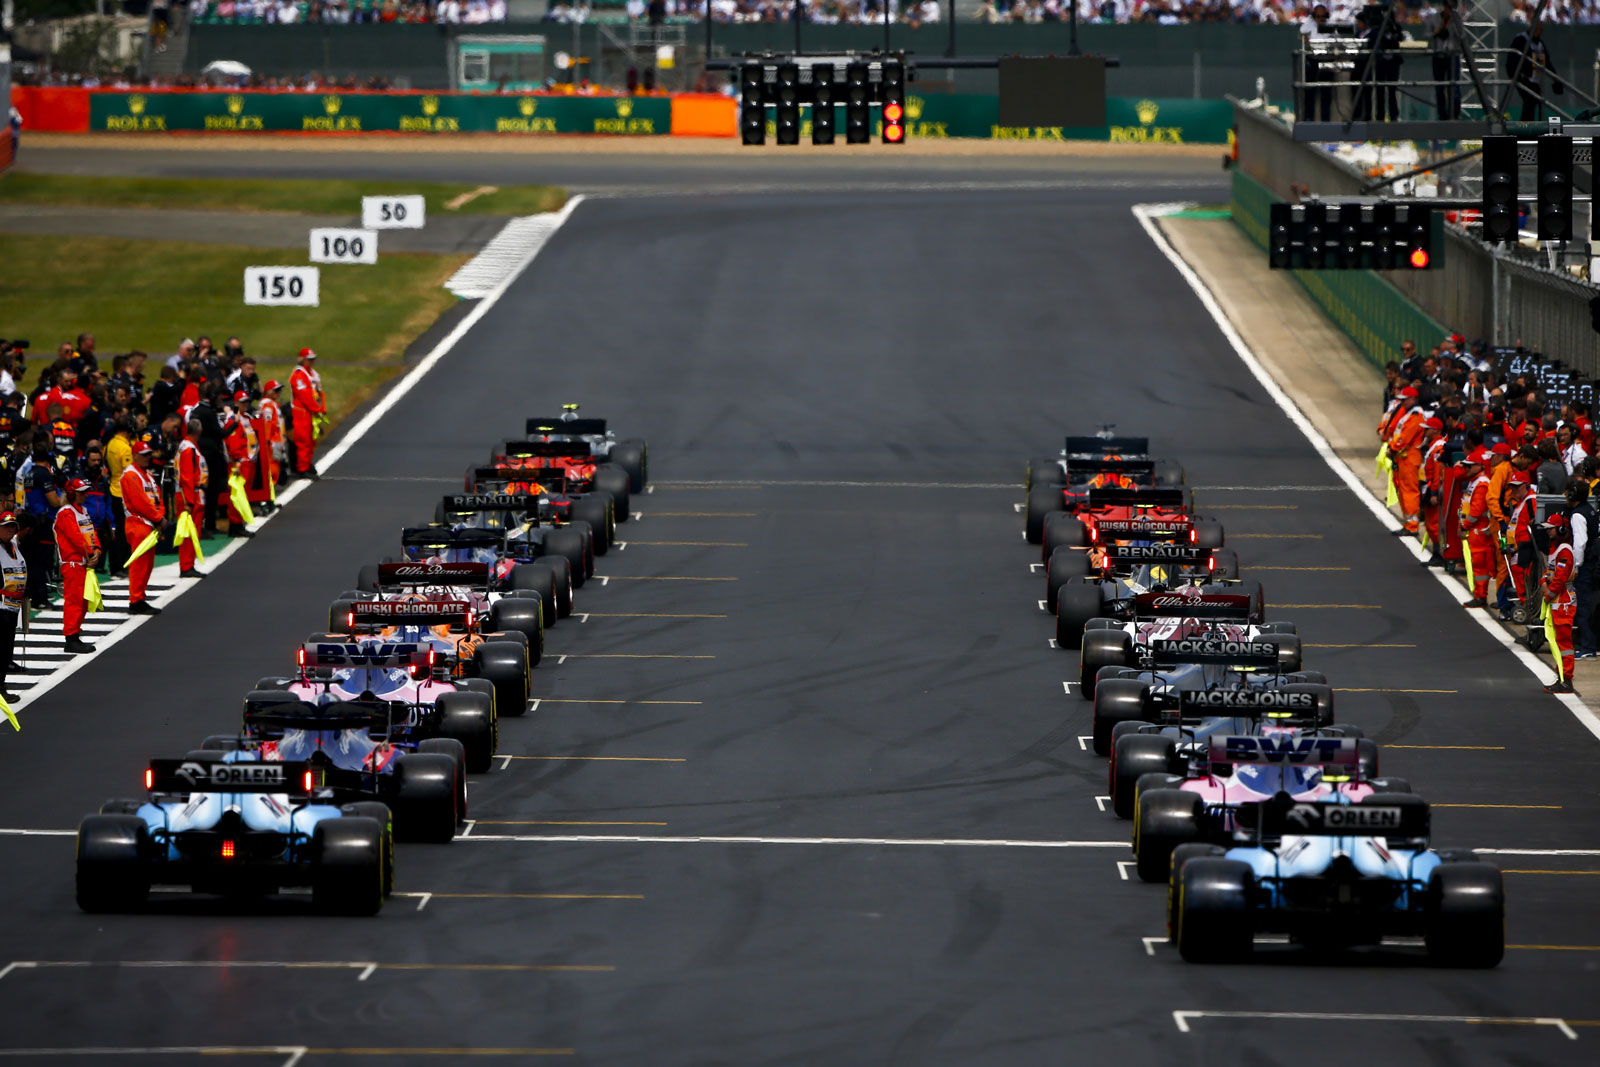 20 Formula 1 cars arranged on the starting grid of the 2019 British Grand Prix